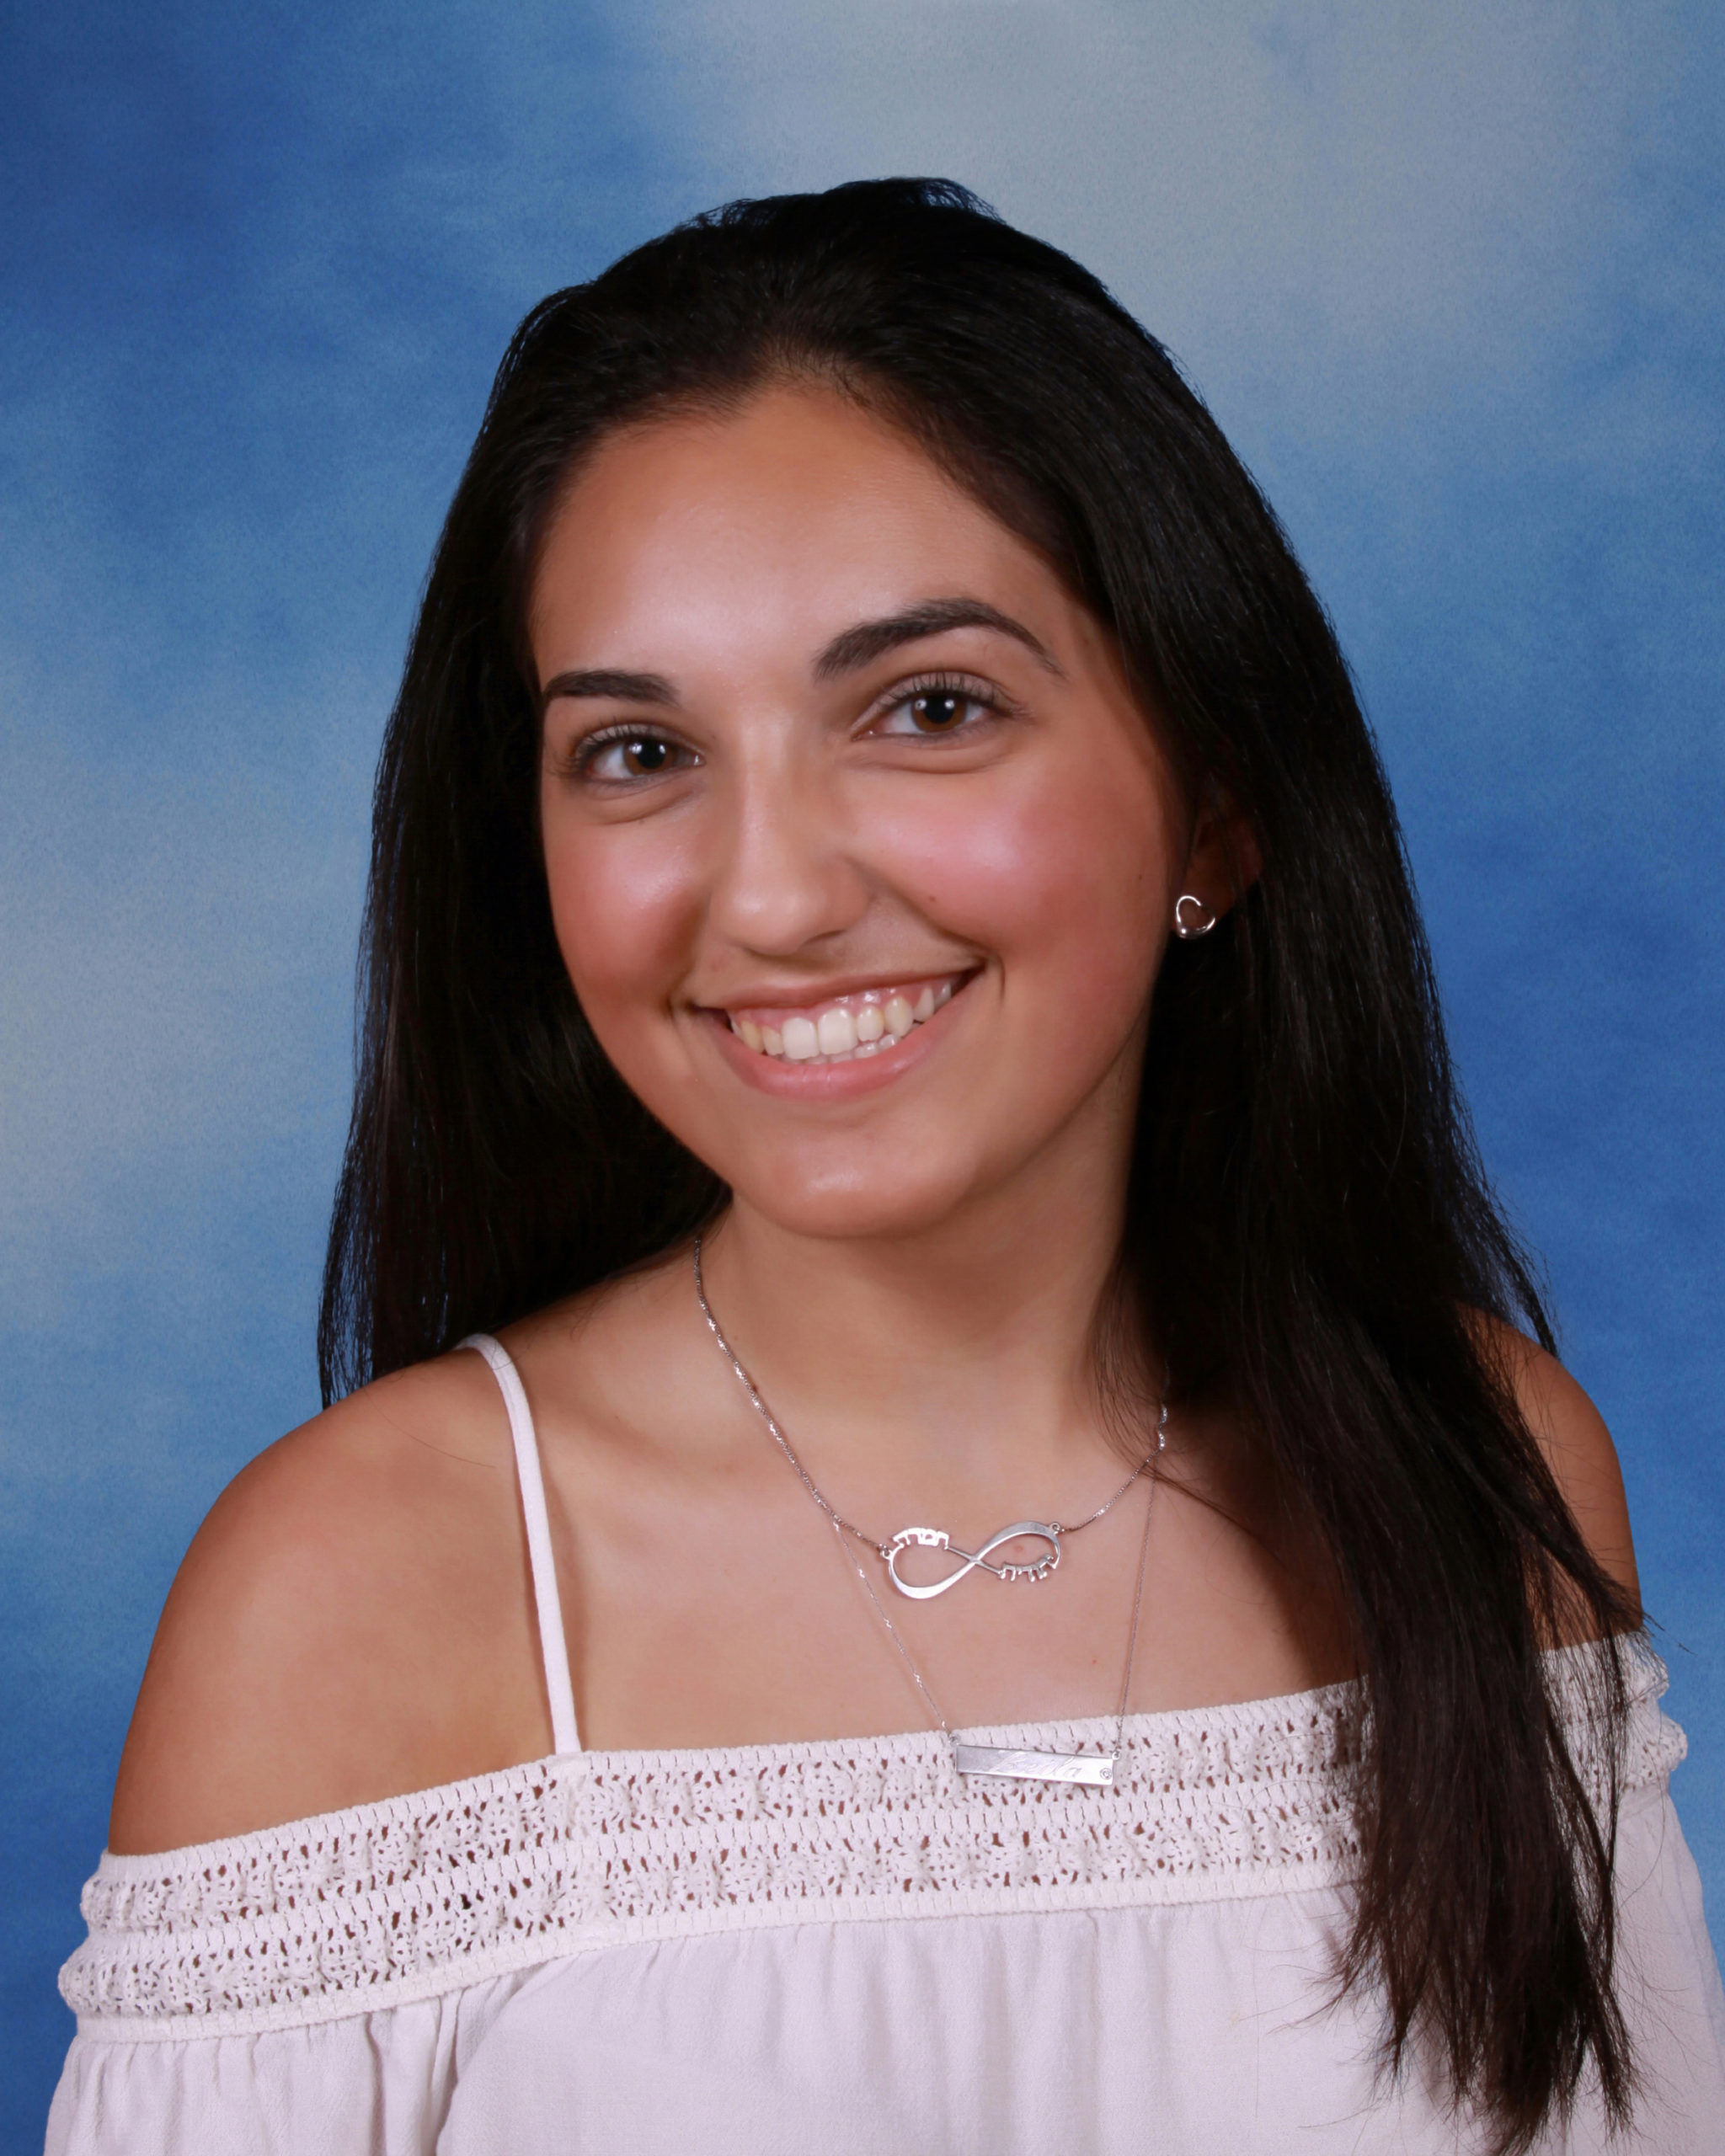 Leila Sassouni used the tale of "Humpty Dumpty" to explain overcoming struggle and failures at commencement. (Photo from the Great Neck Public Schools)